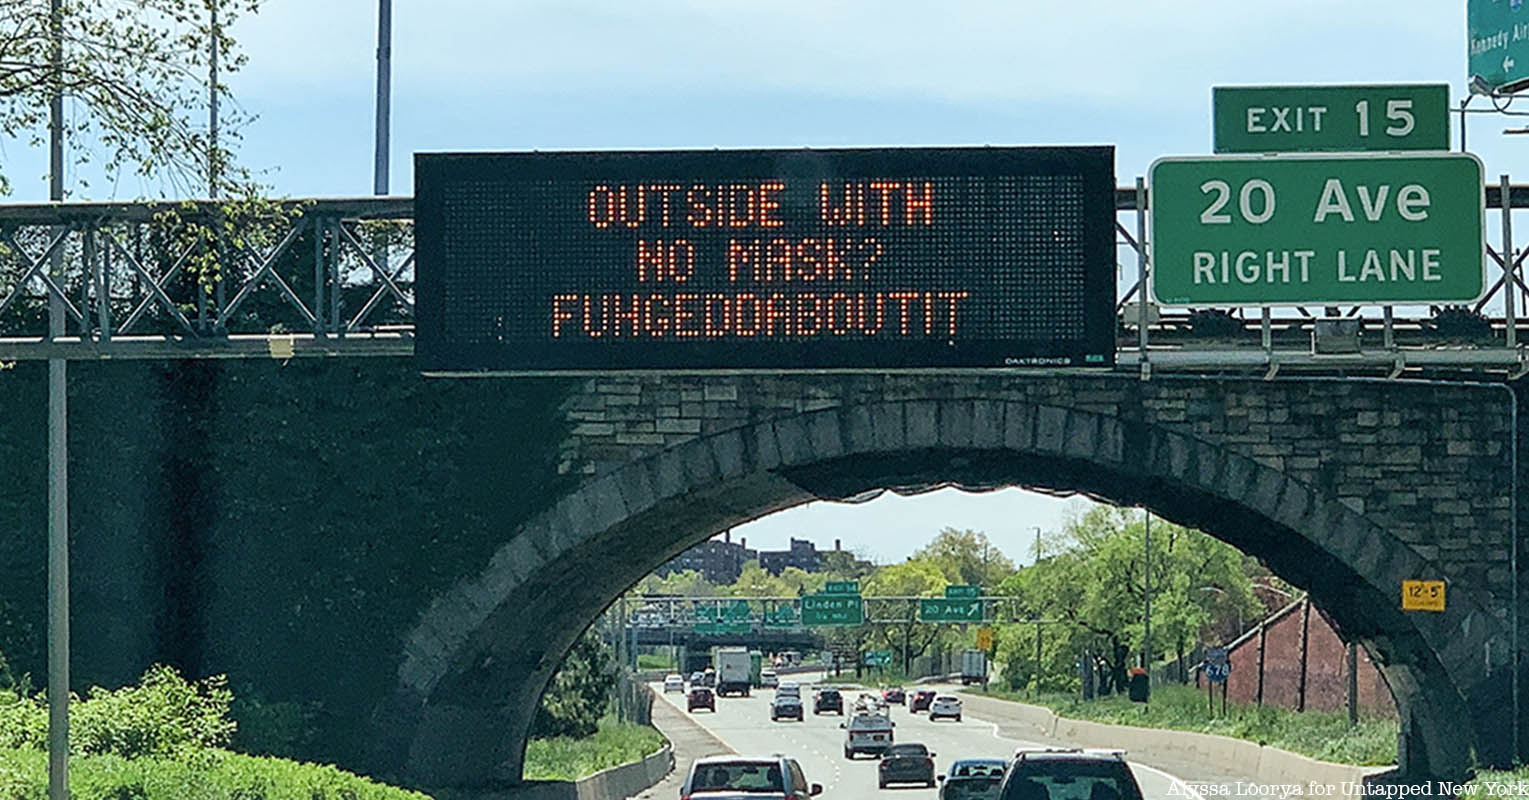 fuhgeddaboudit sign on 678 highway in the Bronx